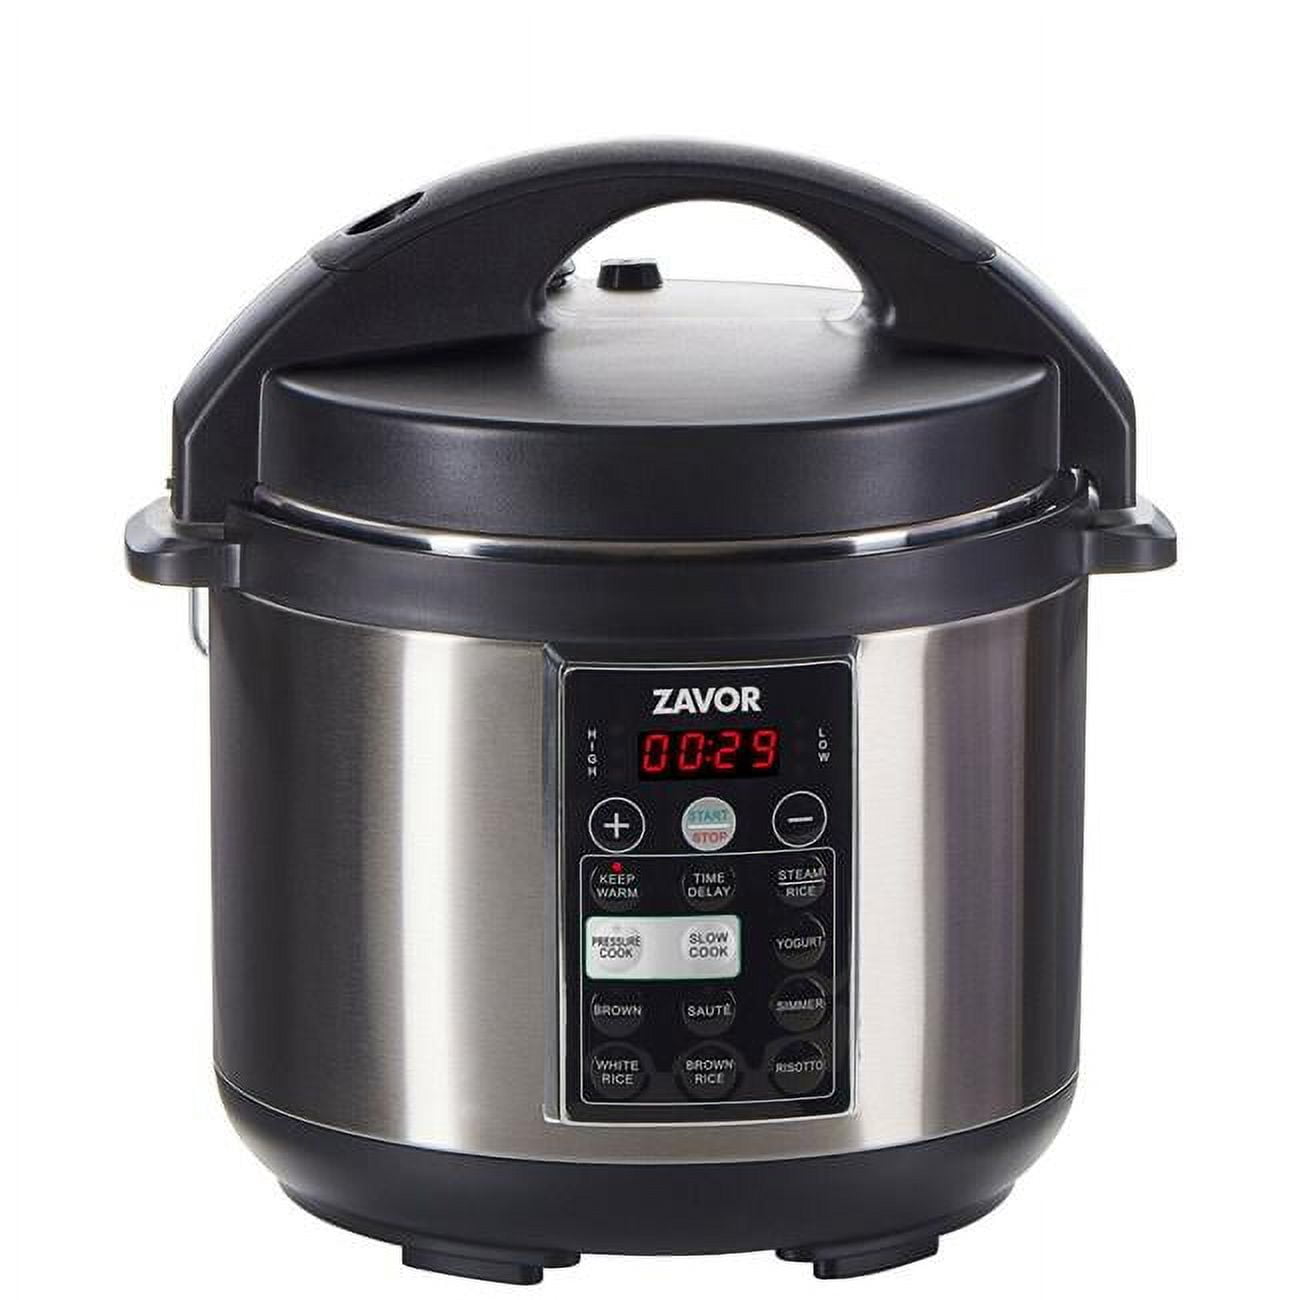 KitchenAid® 4-Qt. Stainless-Steel Multi-Cooker with Steam/Roast